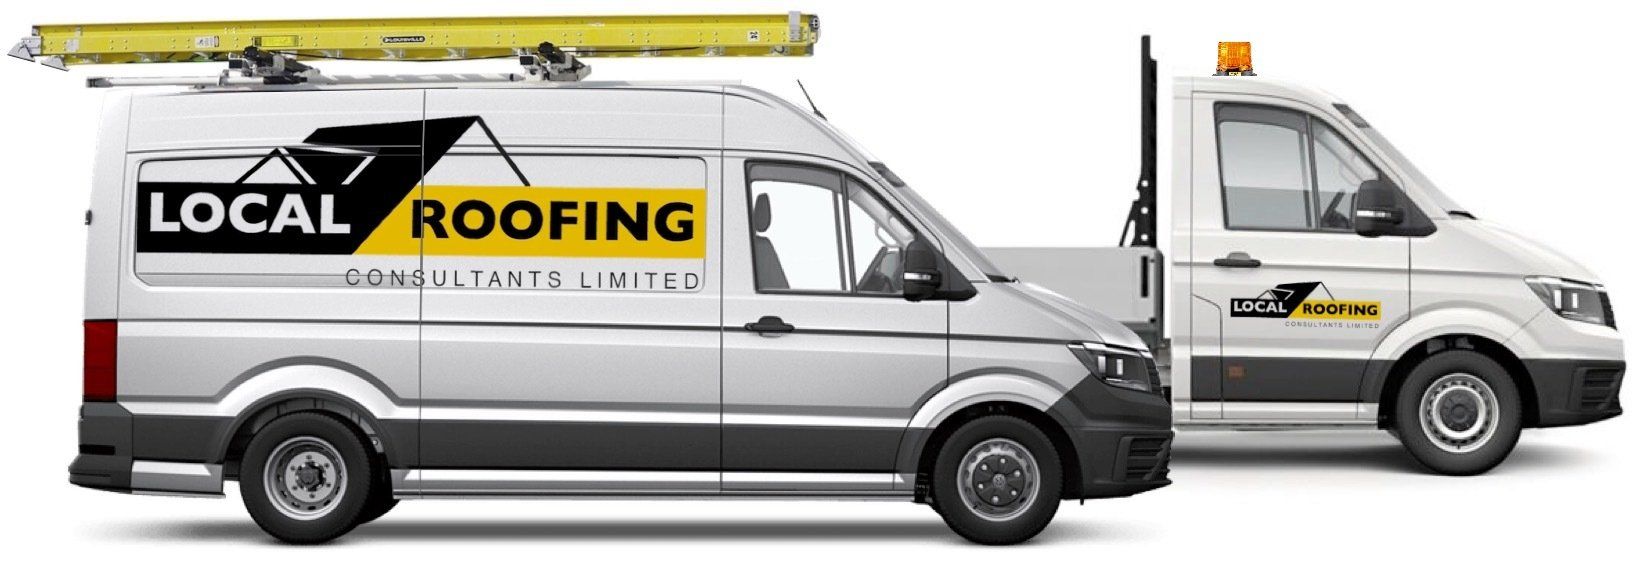 Local Roofing Consultants Limited work in Fulham and throughout the London area